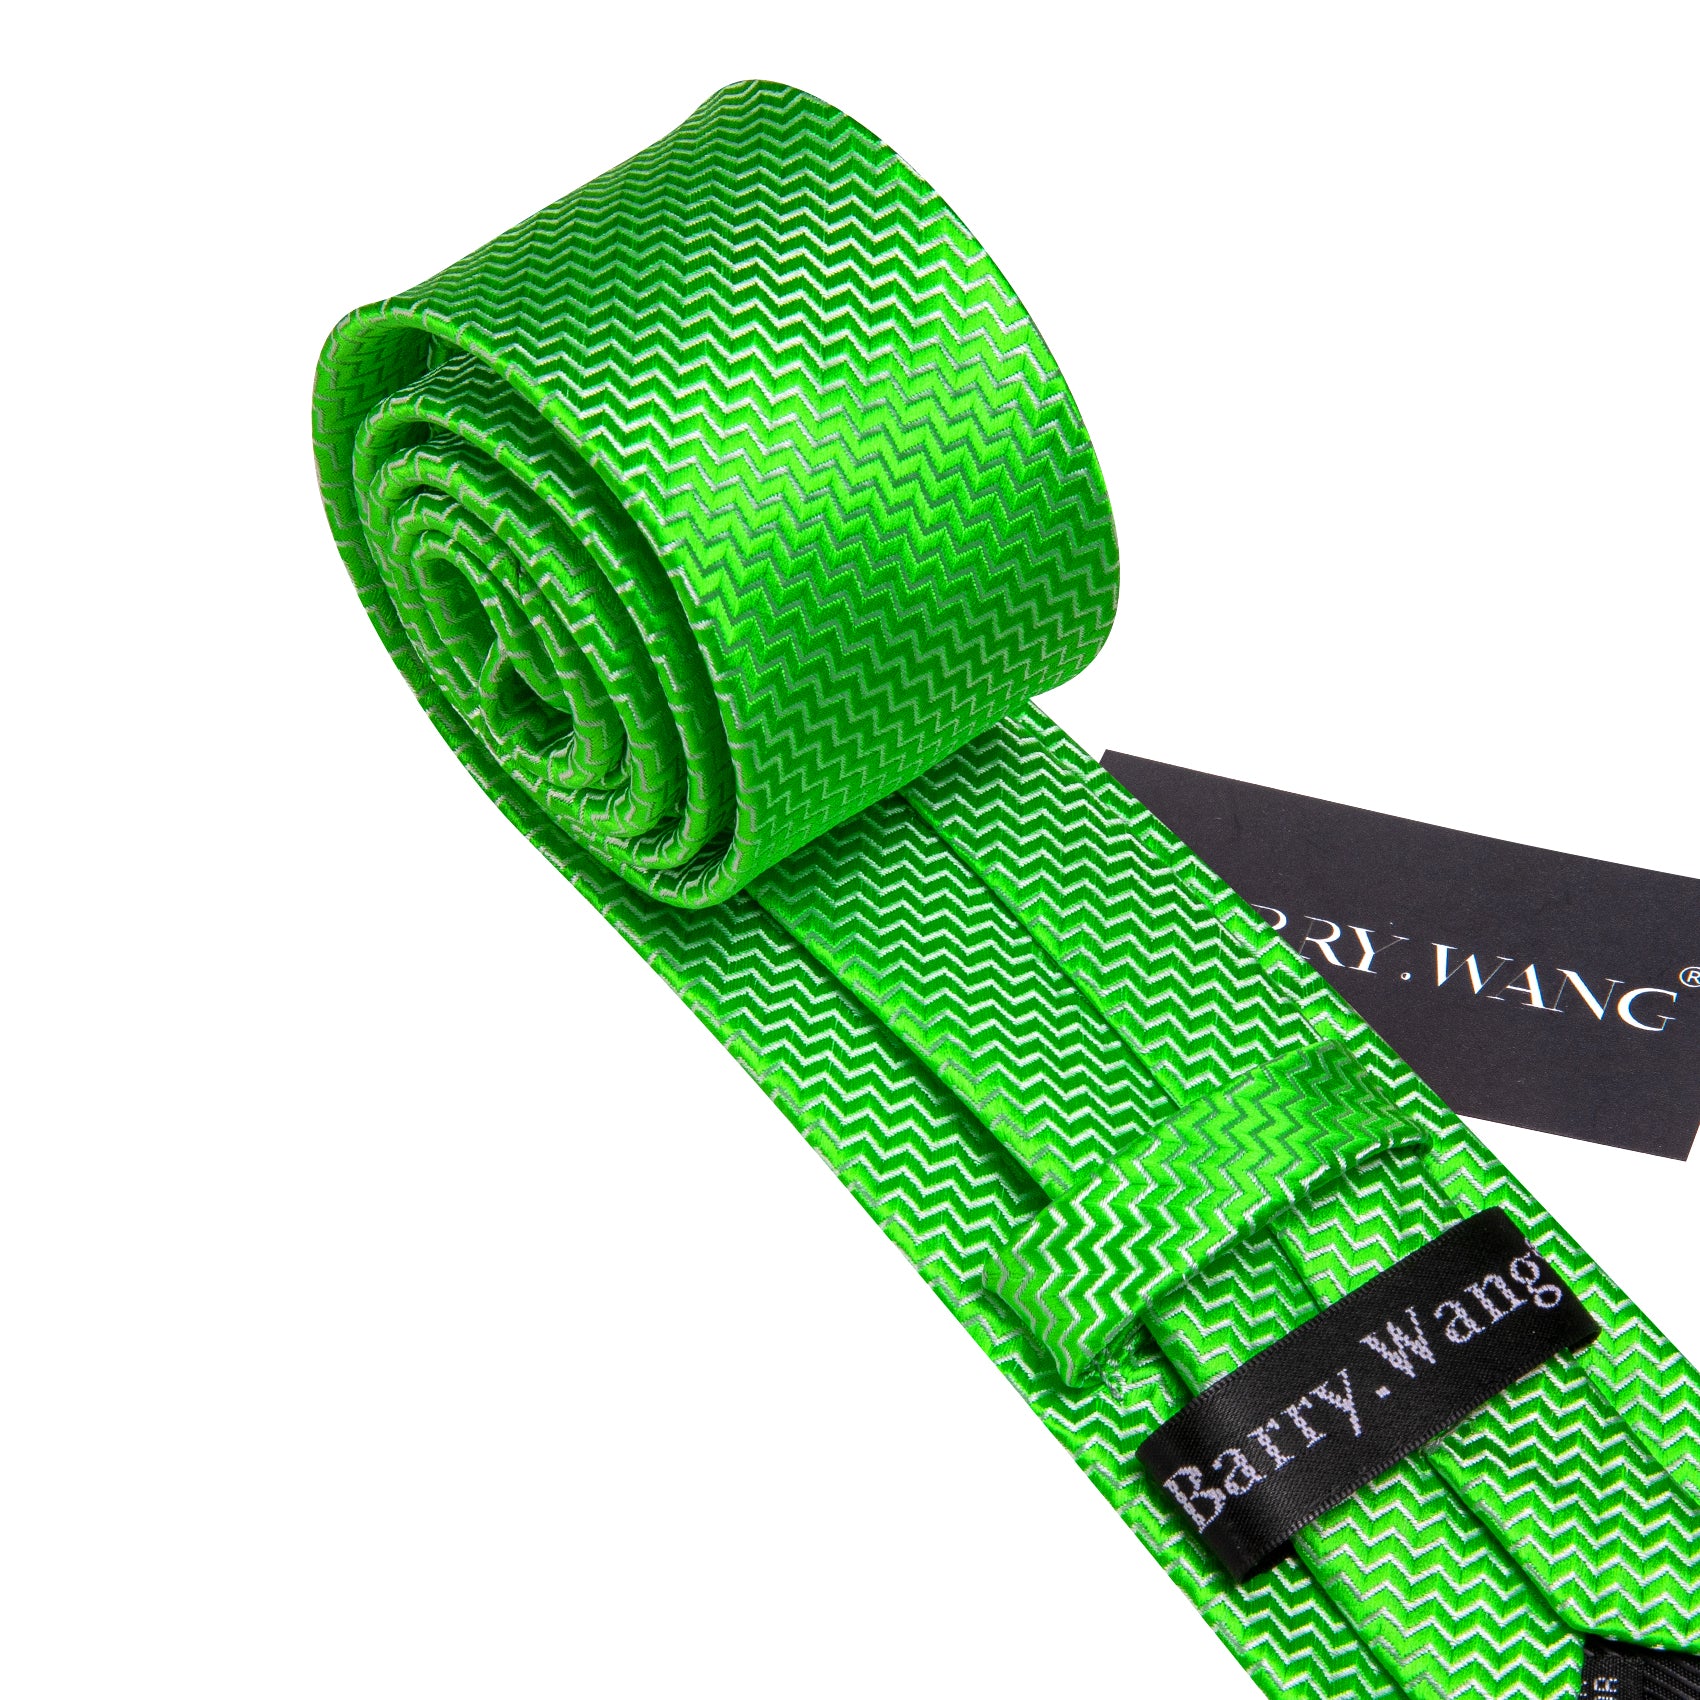 Green Curve Silk 63 Inches Extra Long Tie Hanky Cufflinks Set